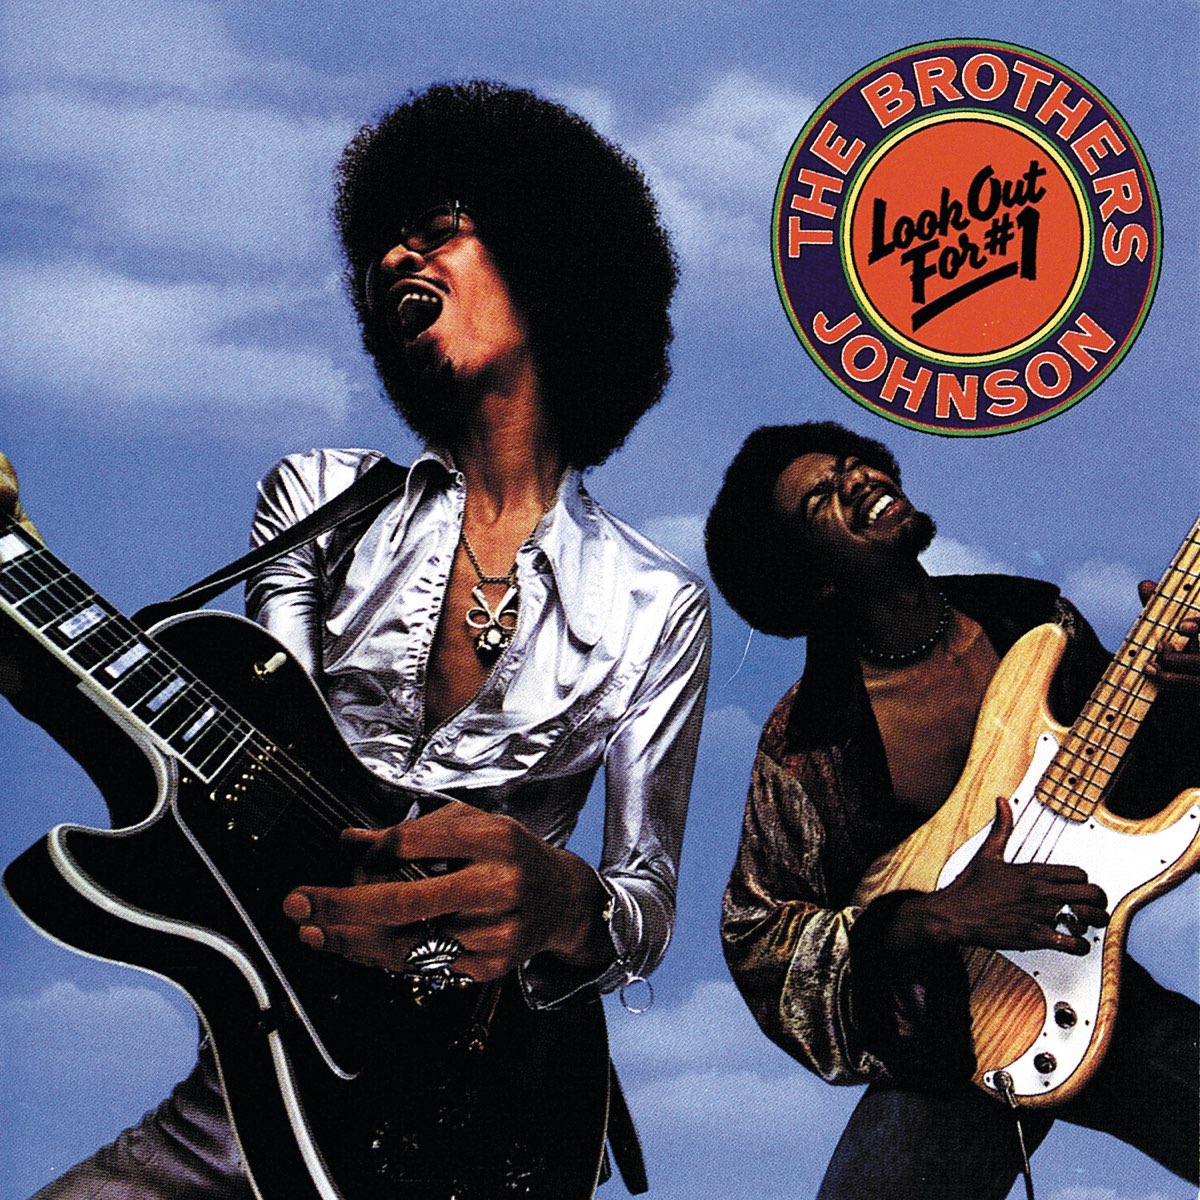 Brothers Johnson Look Out For #1 cover artwork